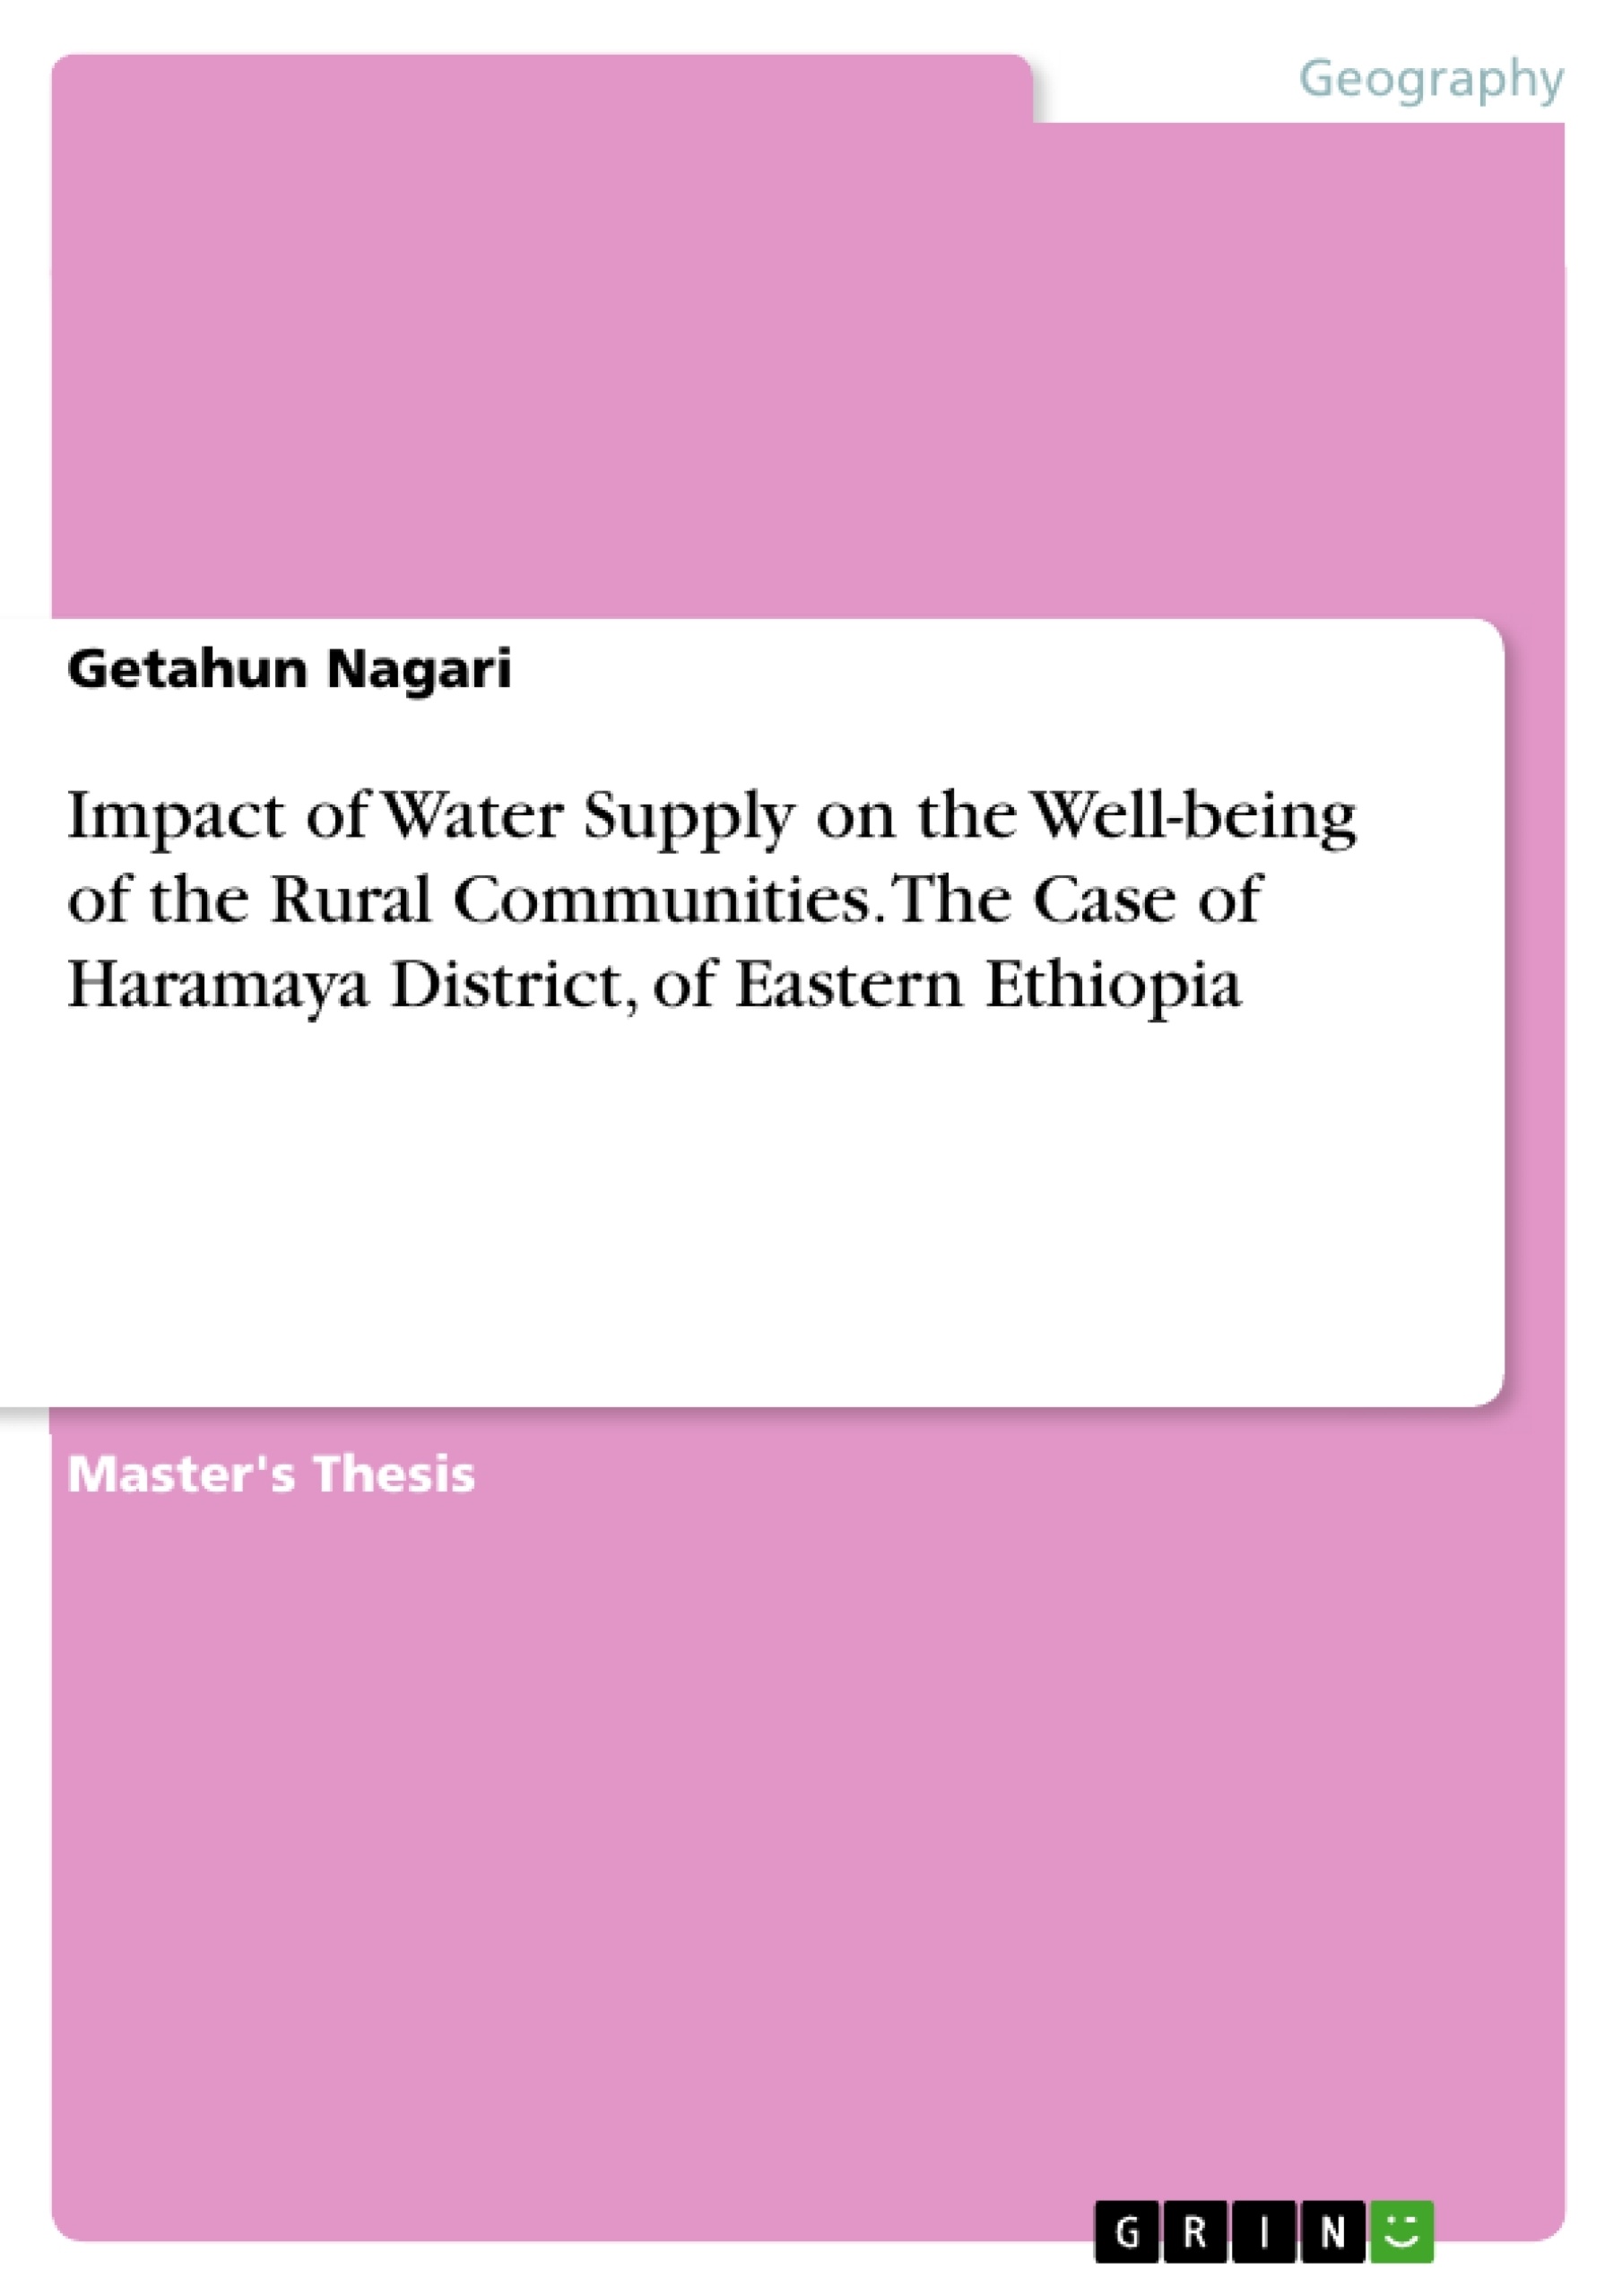 Title: Impact of Water Supply on the Well-being of the Rural Communities. The Case of Haramaya District, of Eastern Ethiopia